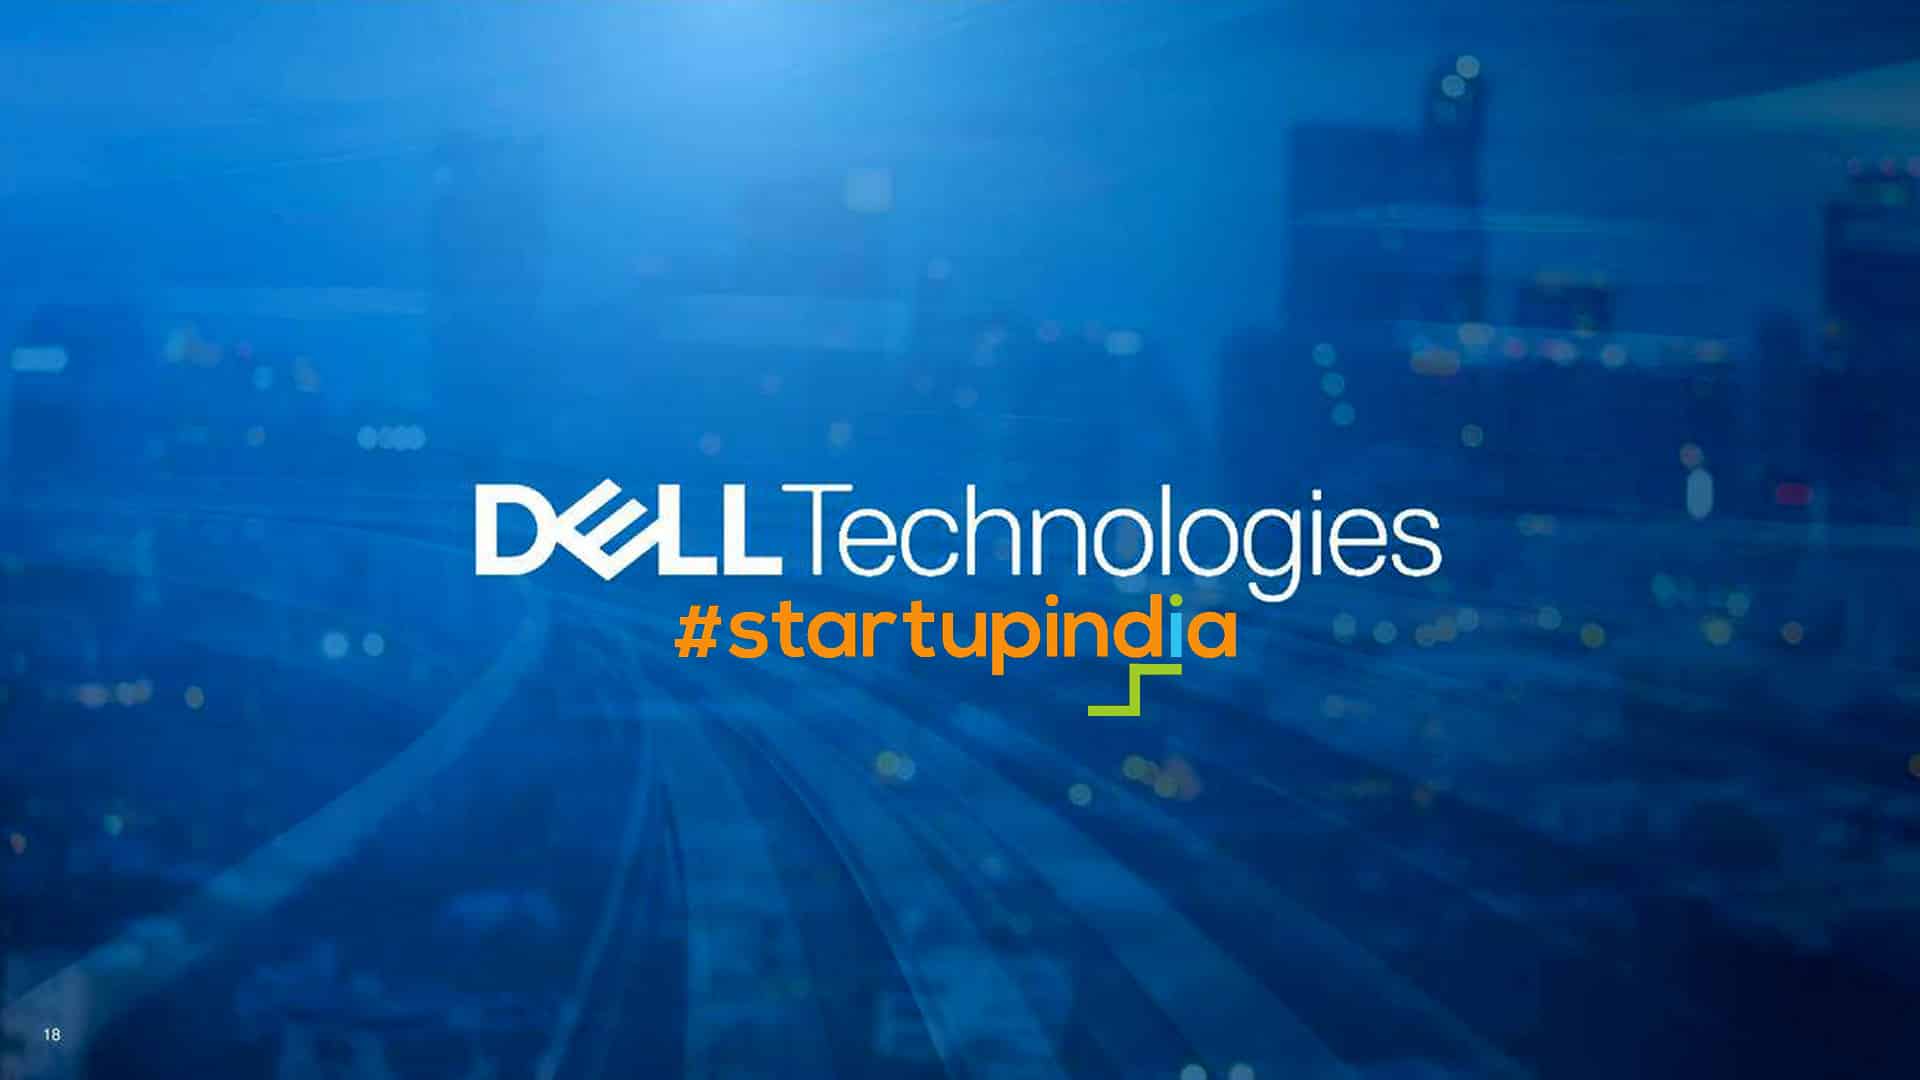 Dell Technologies Partners with Startup India to Empower Startups Scale